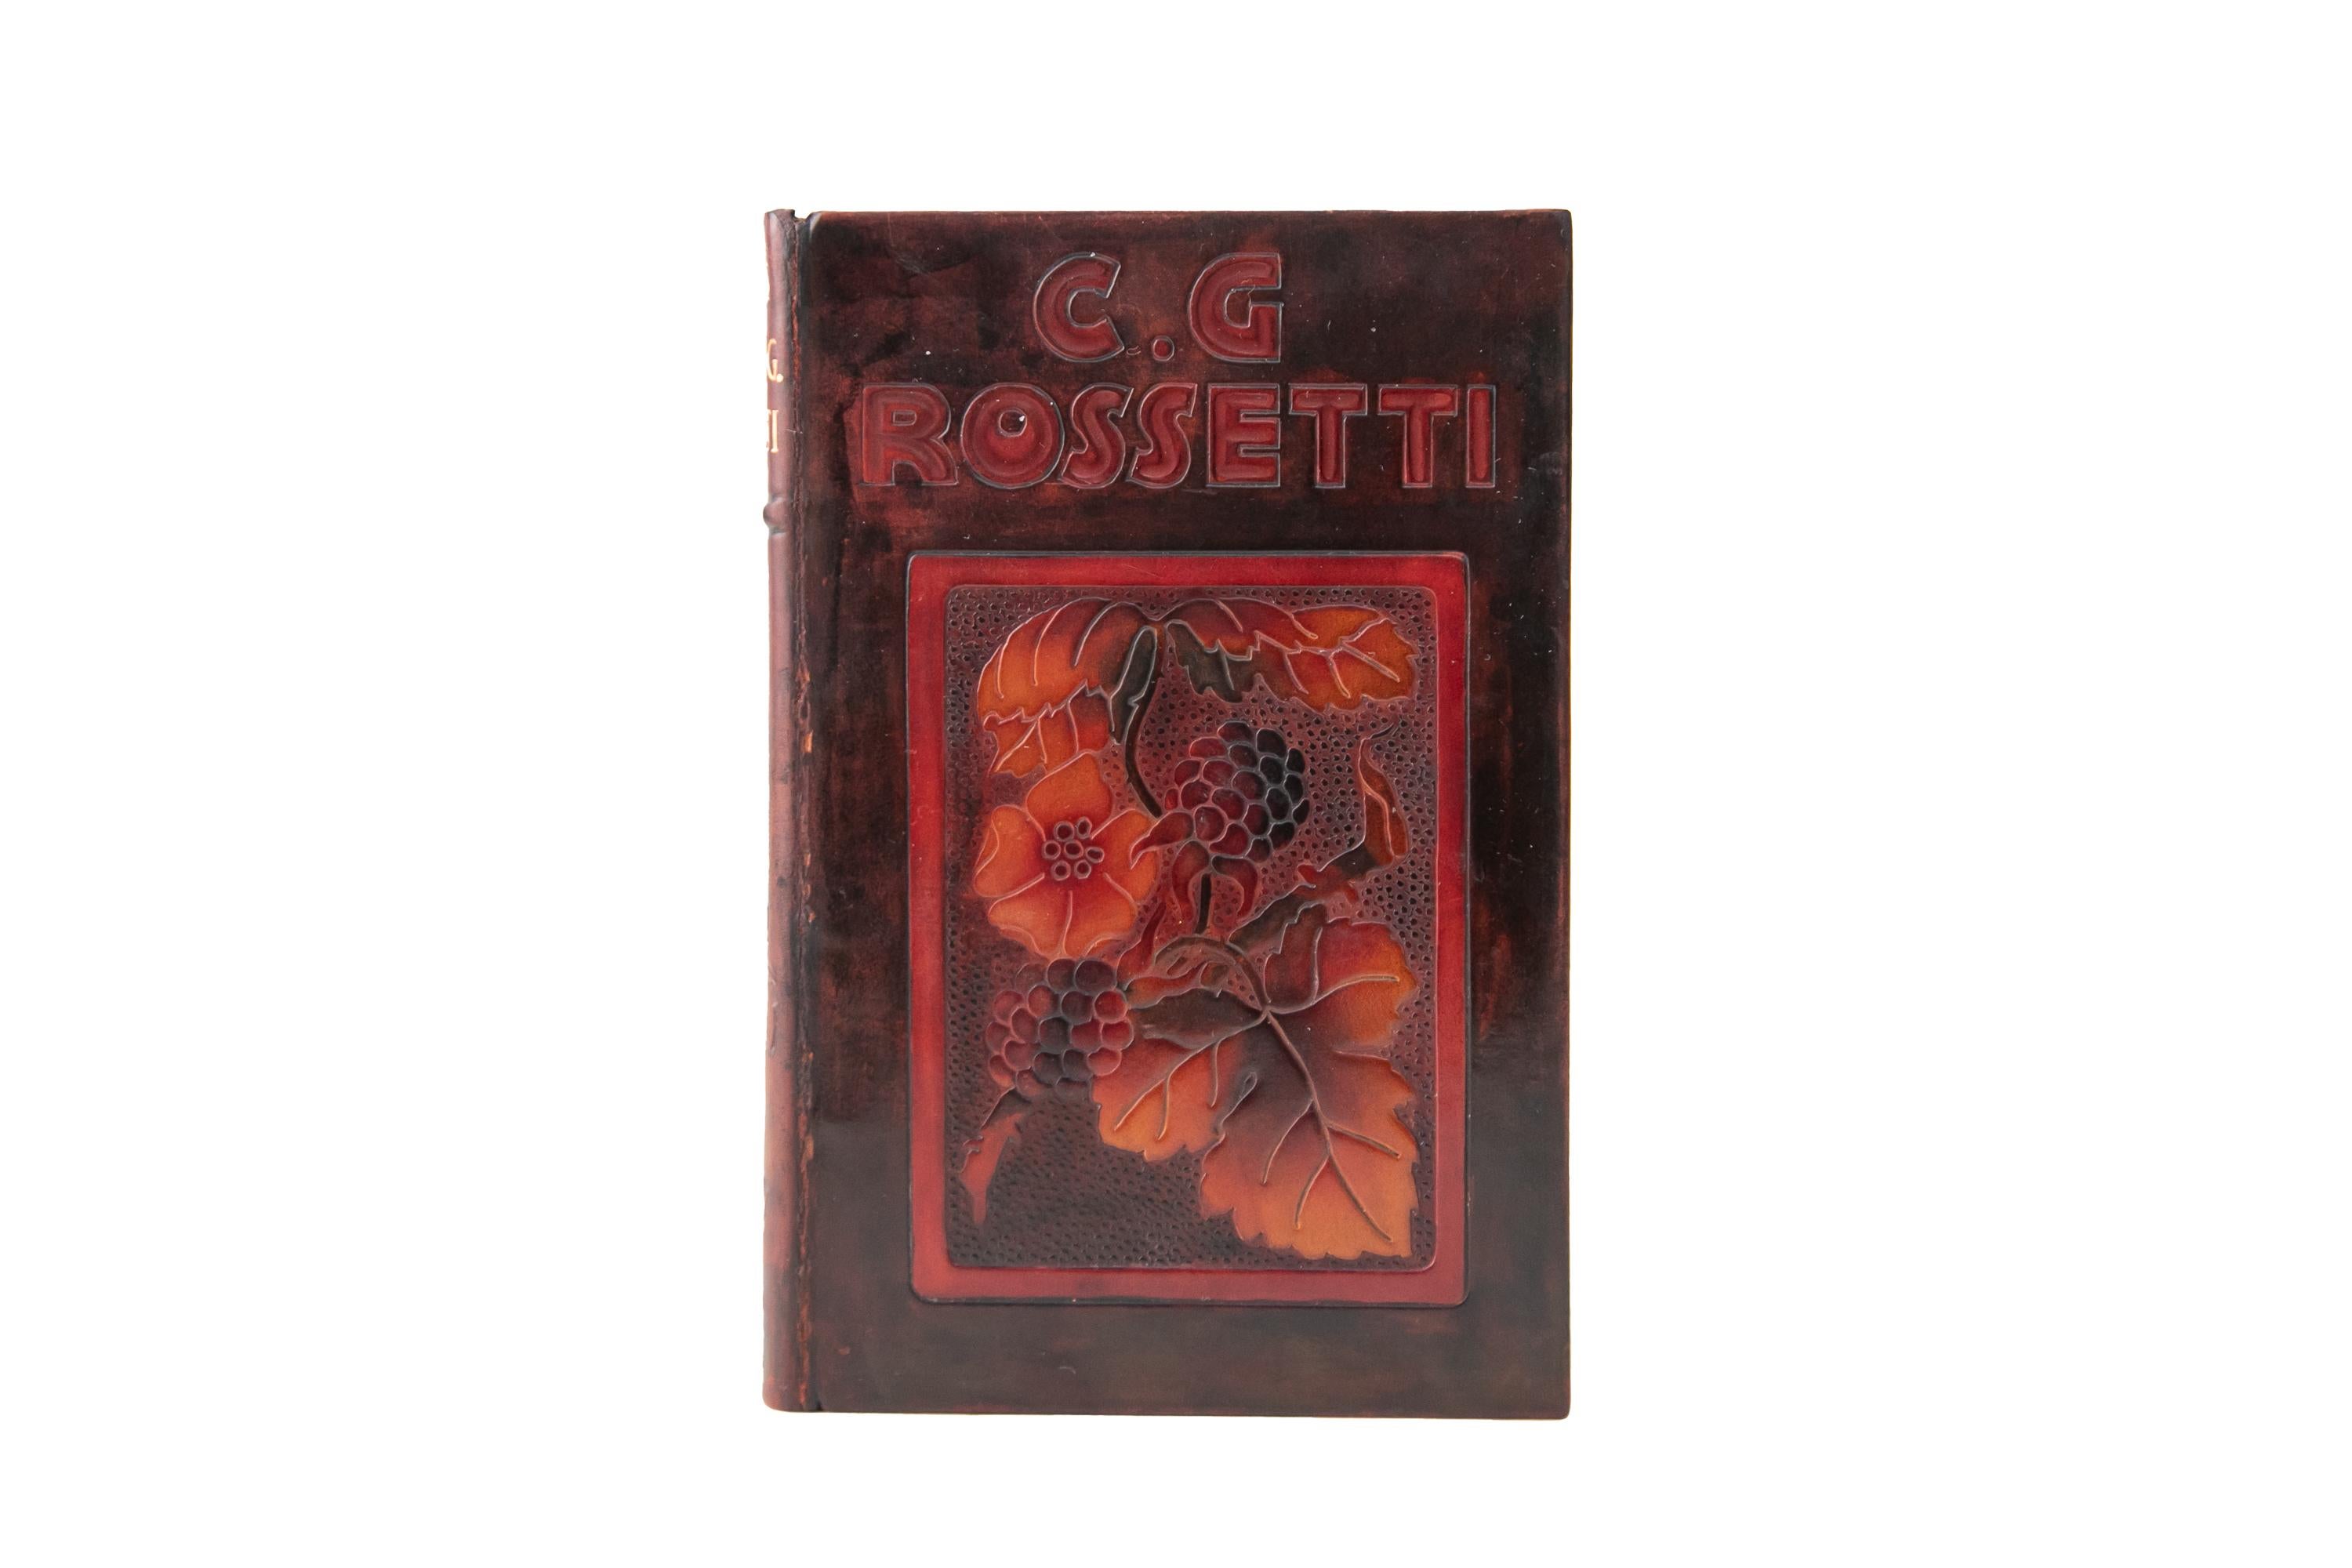 1 Volume. Christina Rossetti, Poems. Bound by Riviere & Son in multi-color calf with the covers displaying the author's name in red and a depiction of flowers and leaves in autumnal colors. The spine displays one raised band, open-tooled leaf